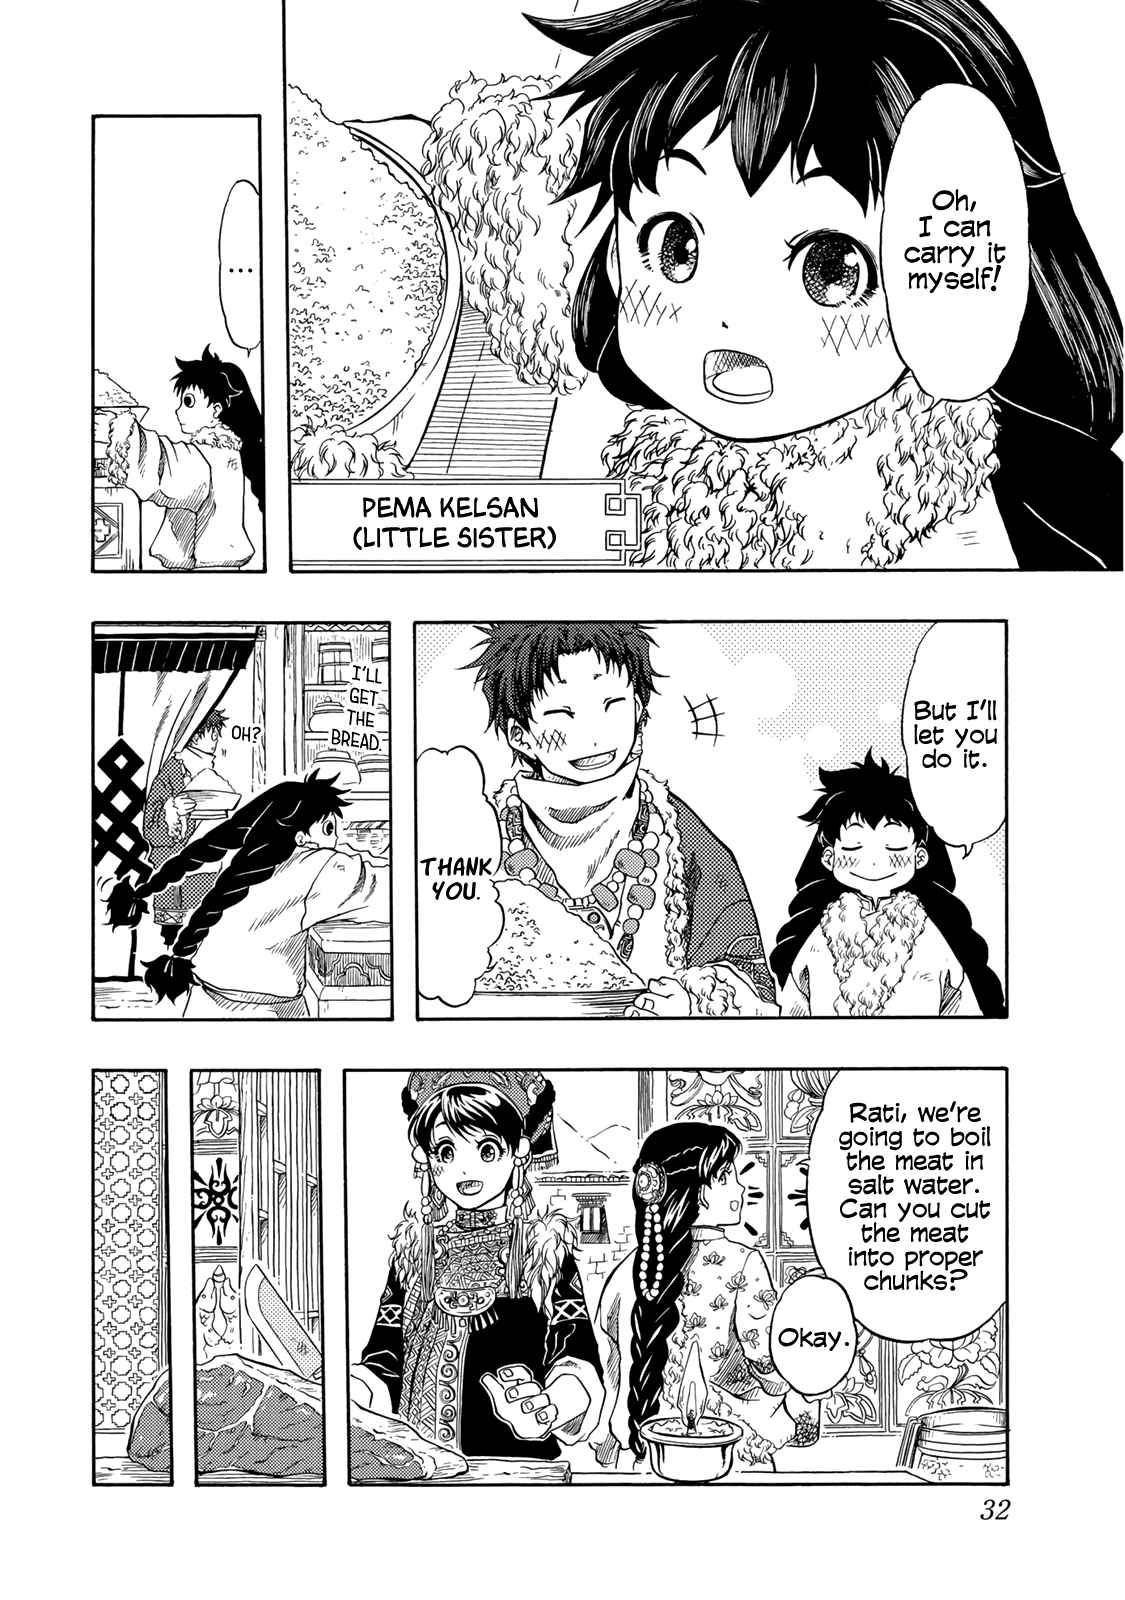 Tenju no Kuni Vol. 1 Ch. 1 A Bride From A Foreign Land